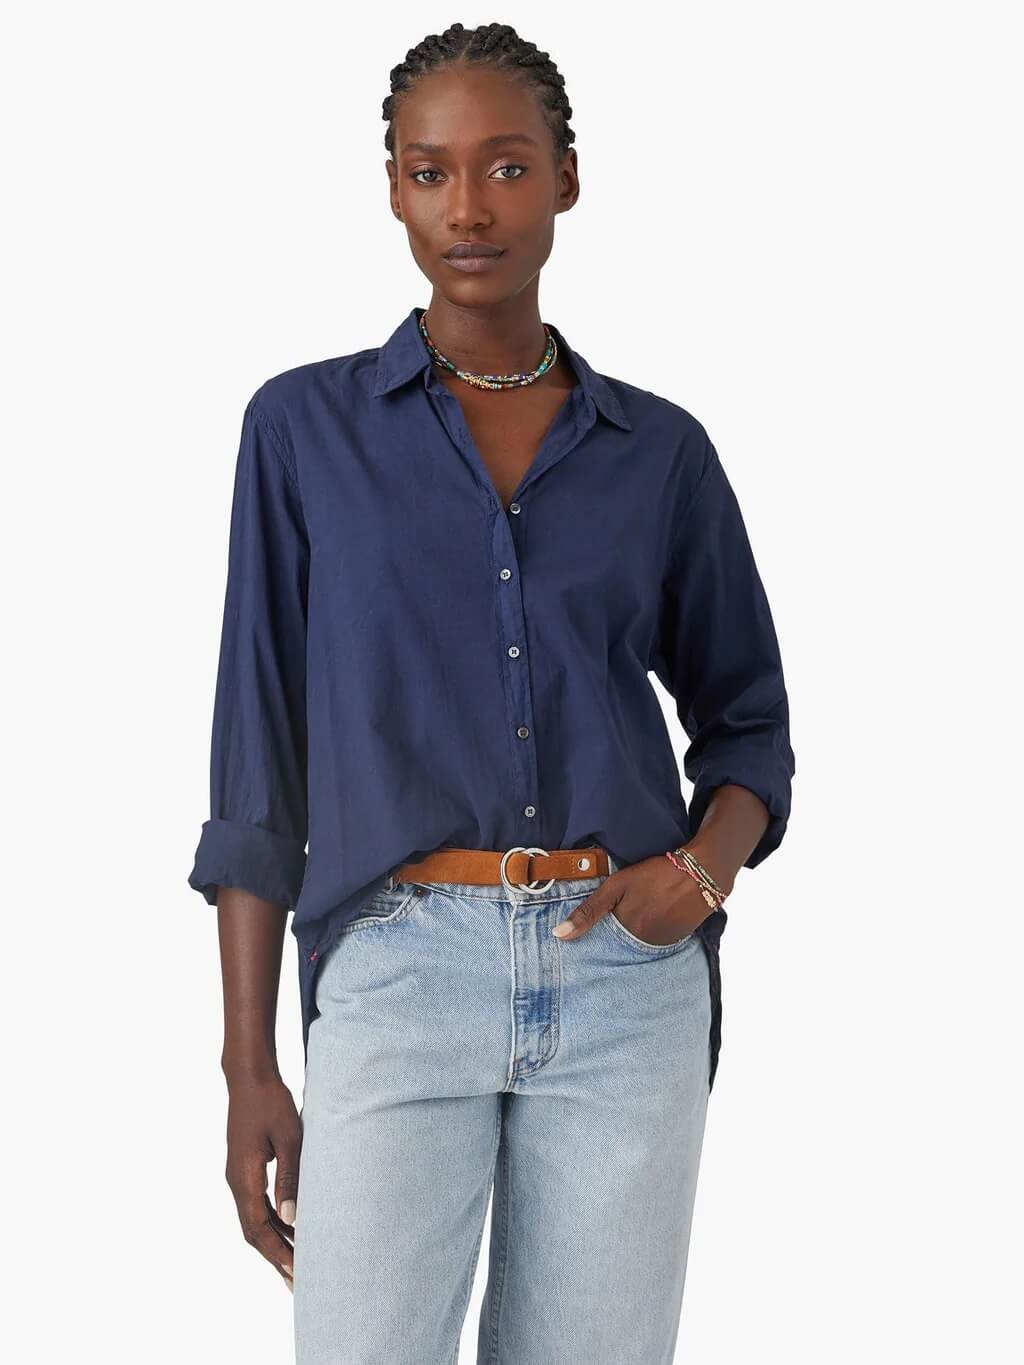 Xirena Beau Oversized Shirt in Navy Blue from The New Trend